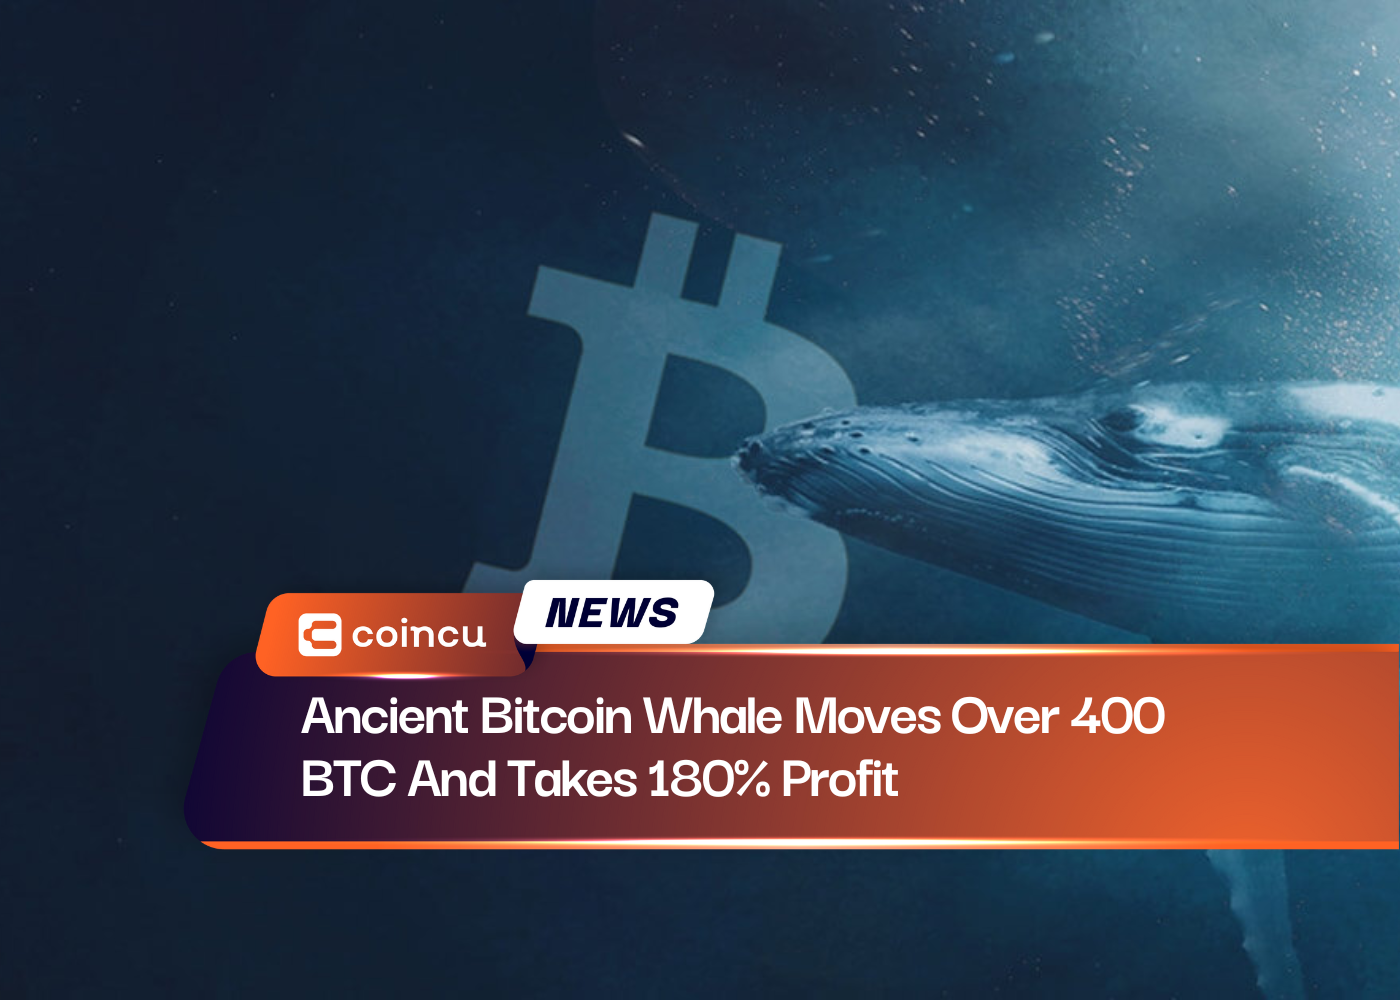 Ancient Bitcoin Whale Moves Over 400 BTC And Takes 180% Profit